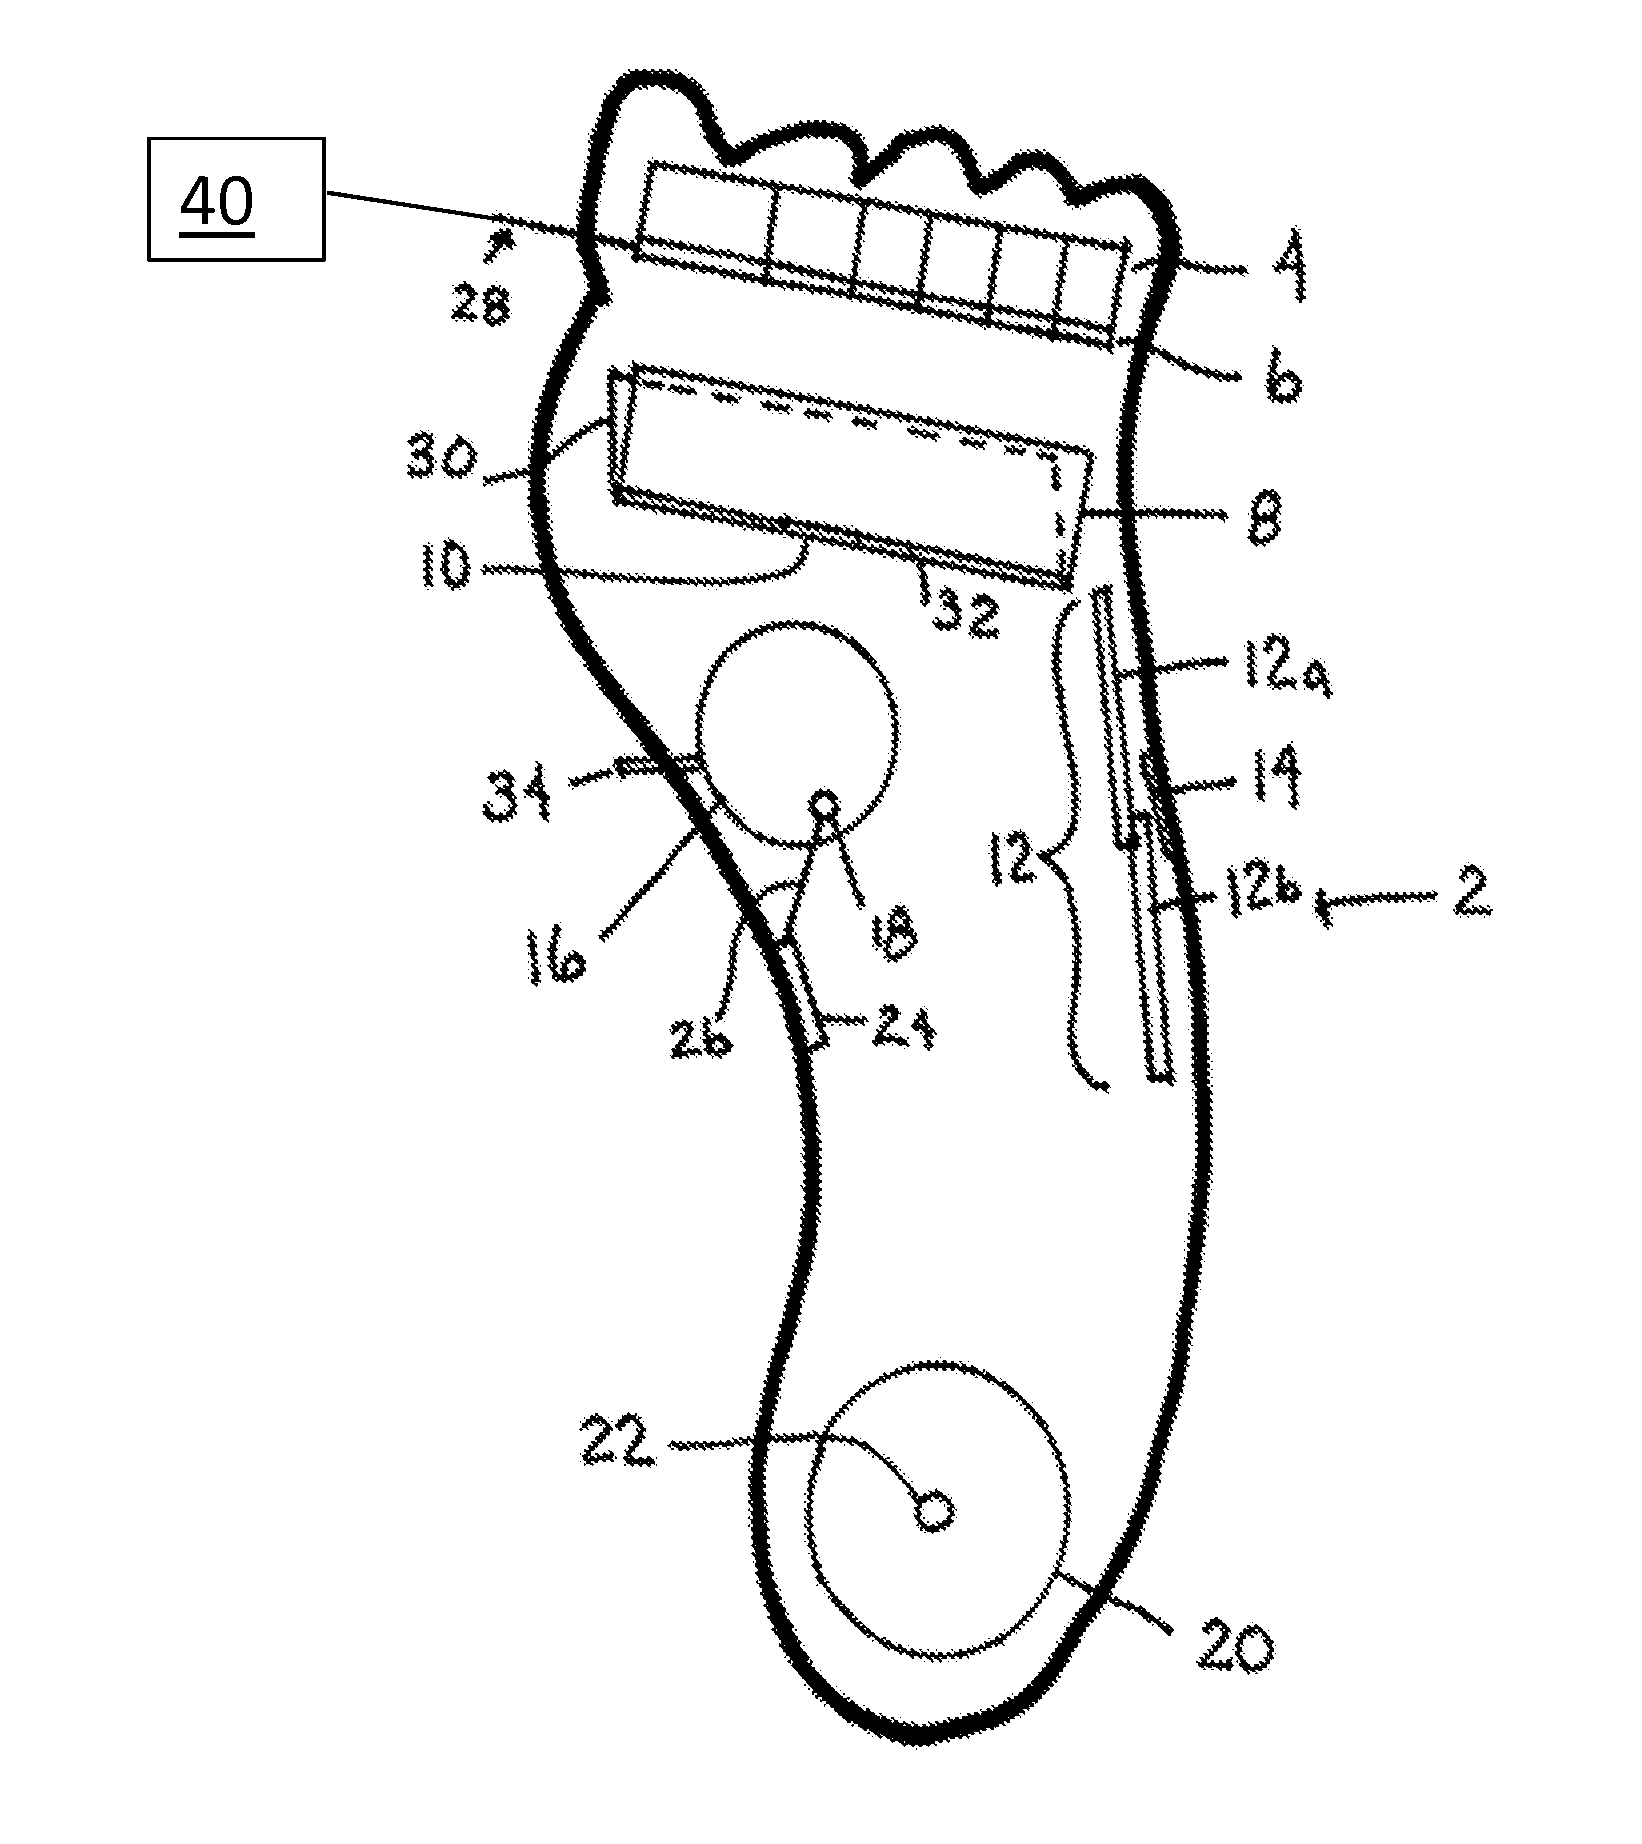 Actuated foot orthotic with sensors